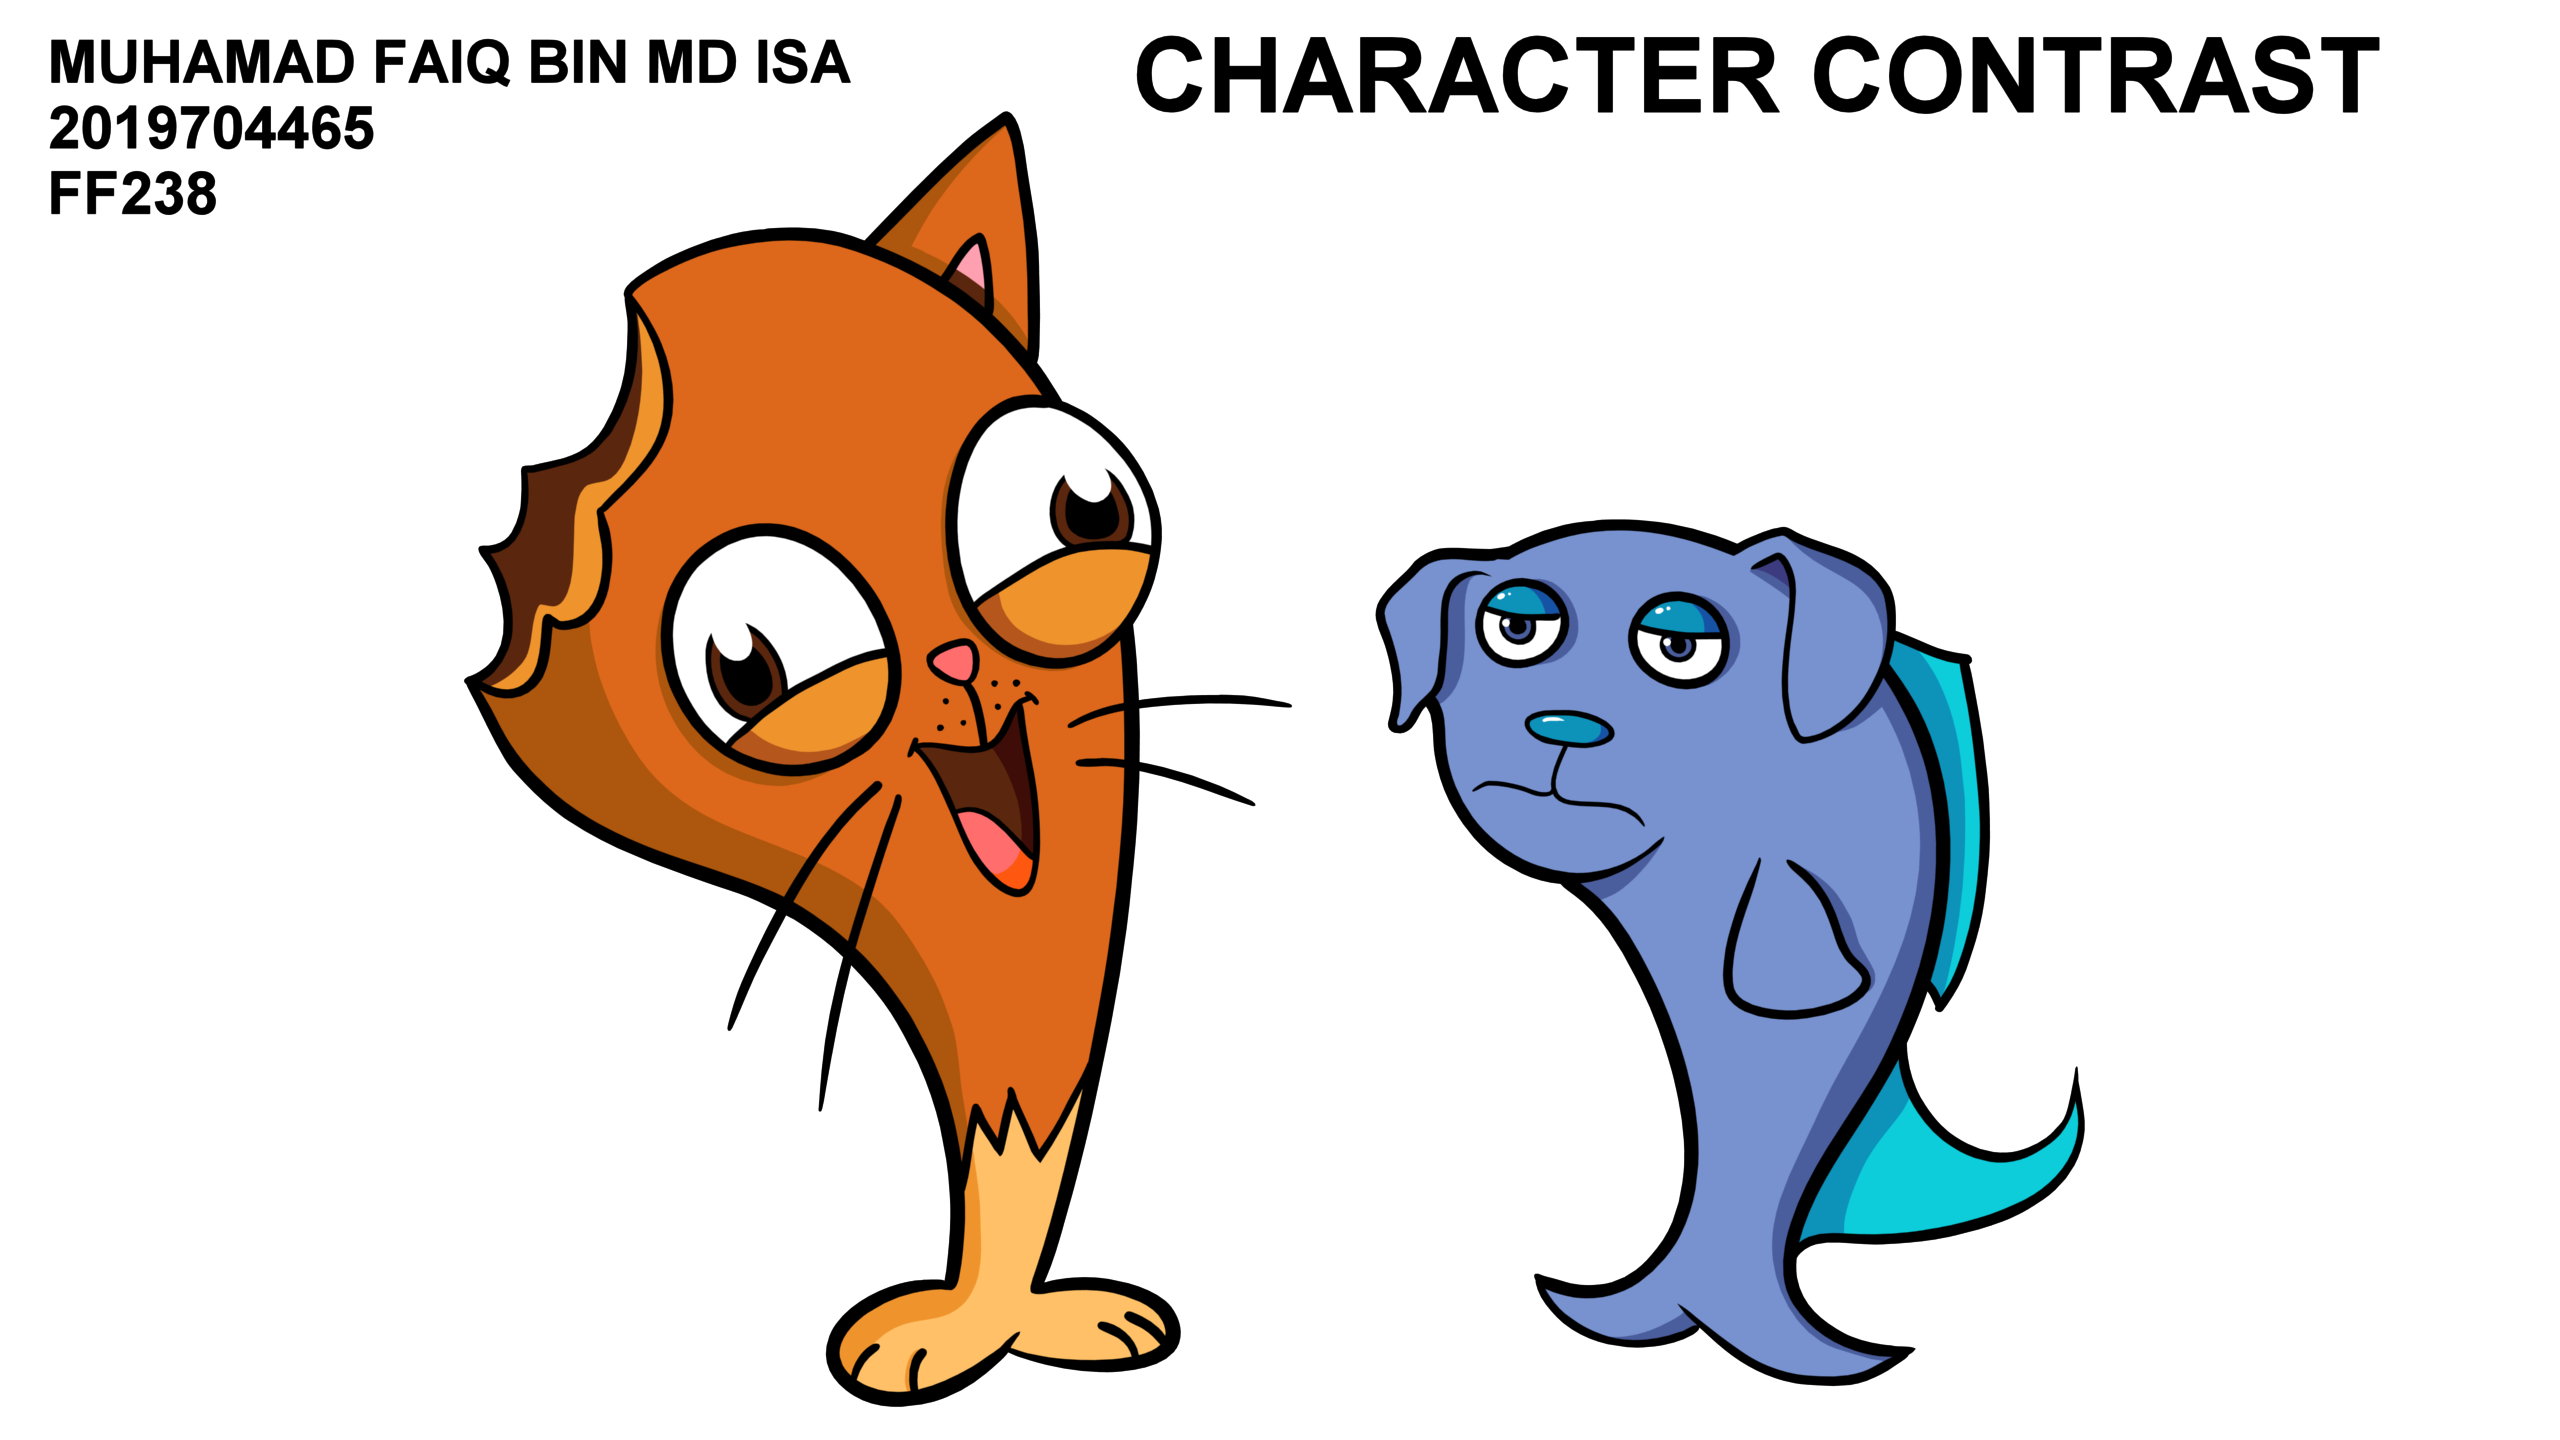 Character contrast